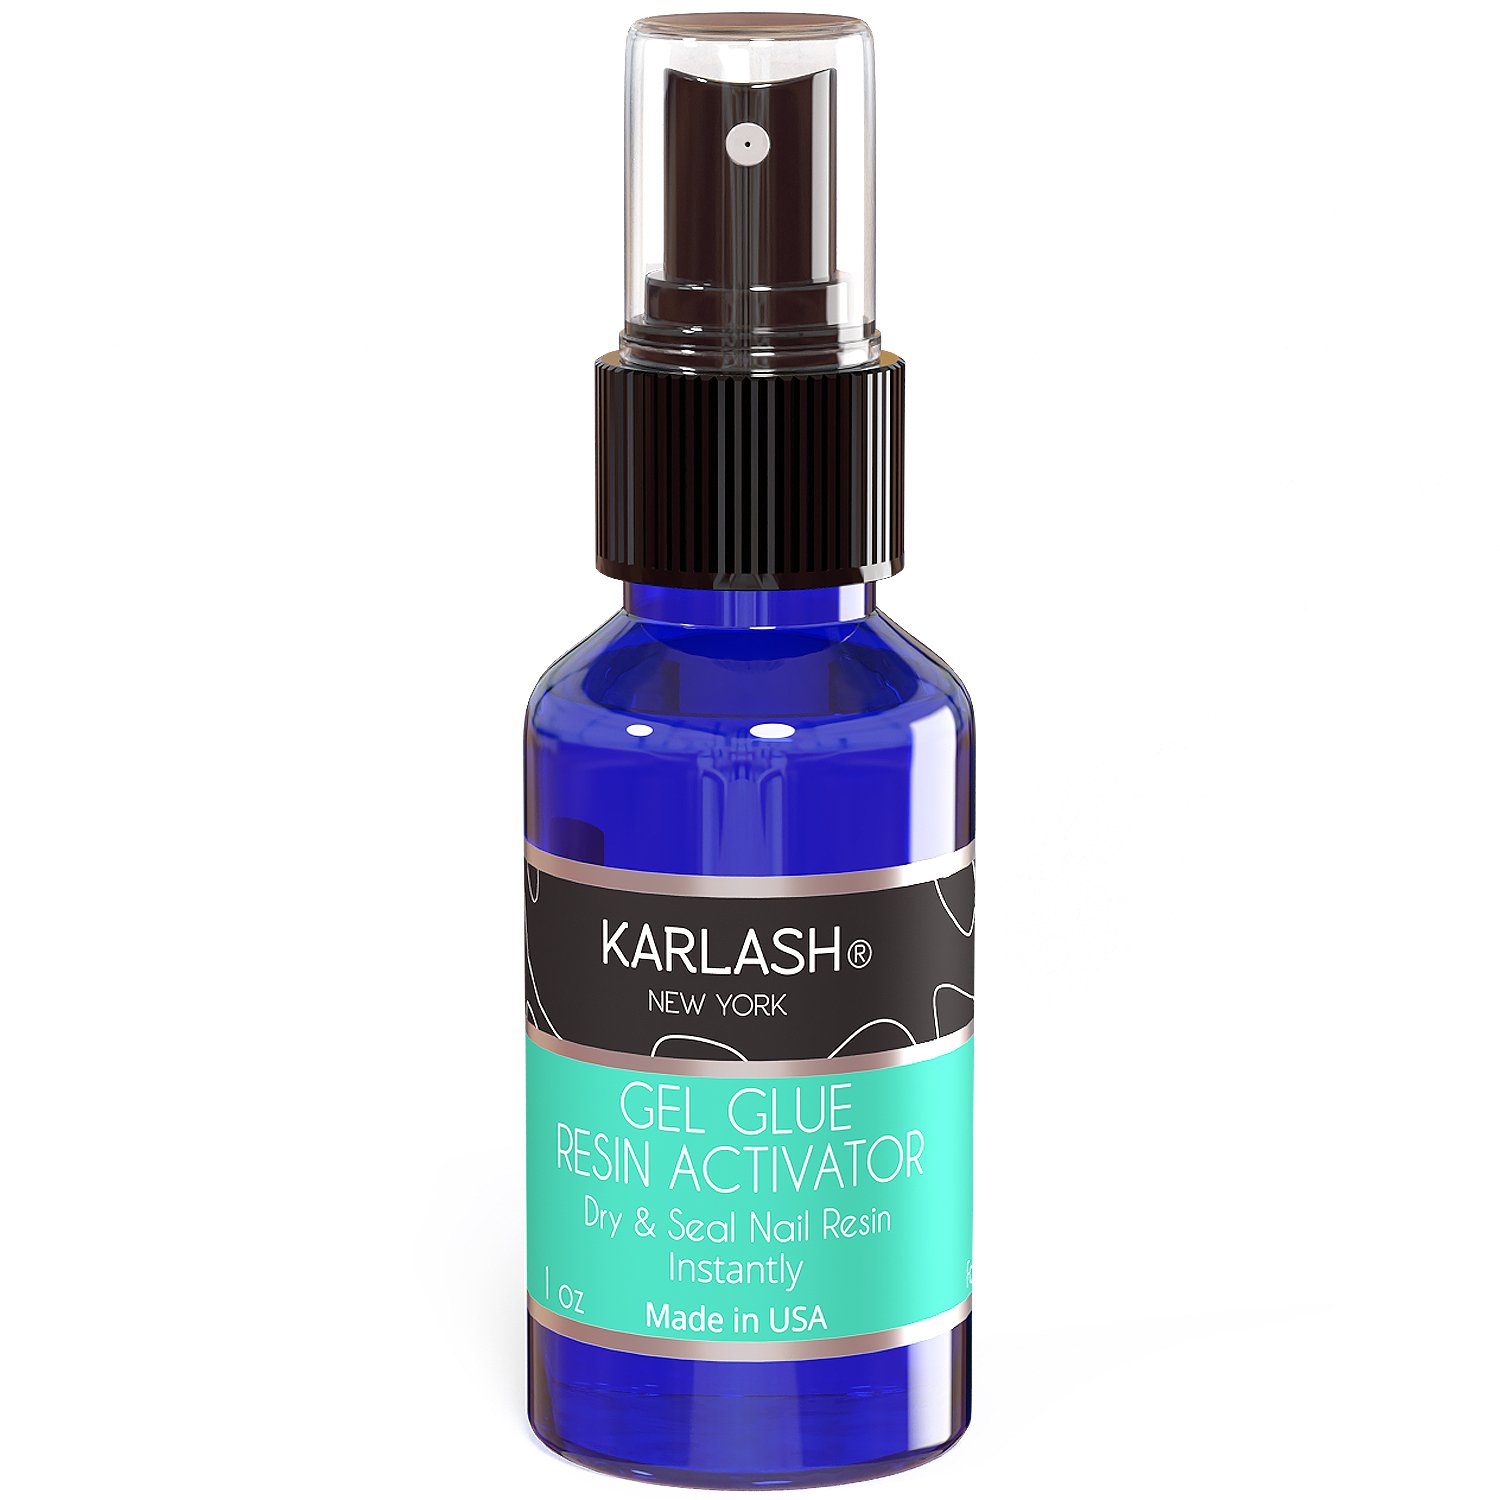 Karlash Nail Resin Gel Glue Activator 1 oz Dry Nail Glues Resin Instantly  for Gel and Silk Wraps